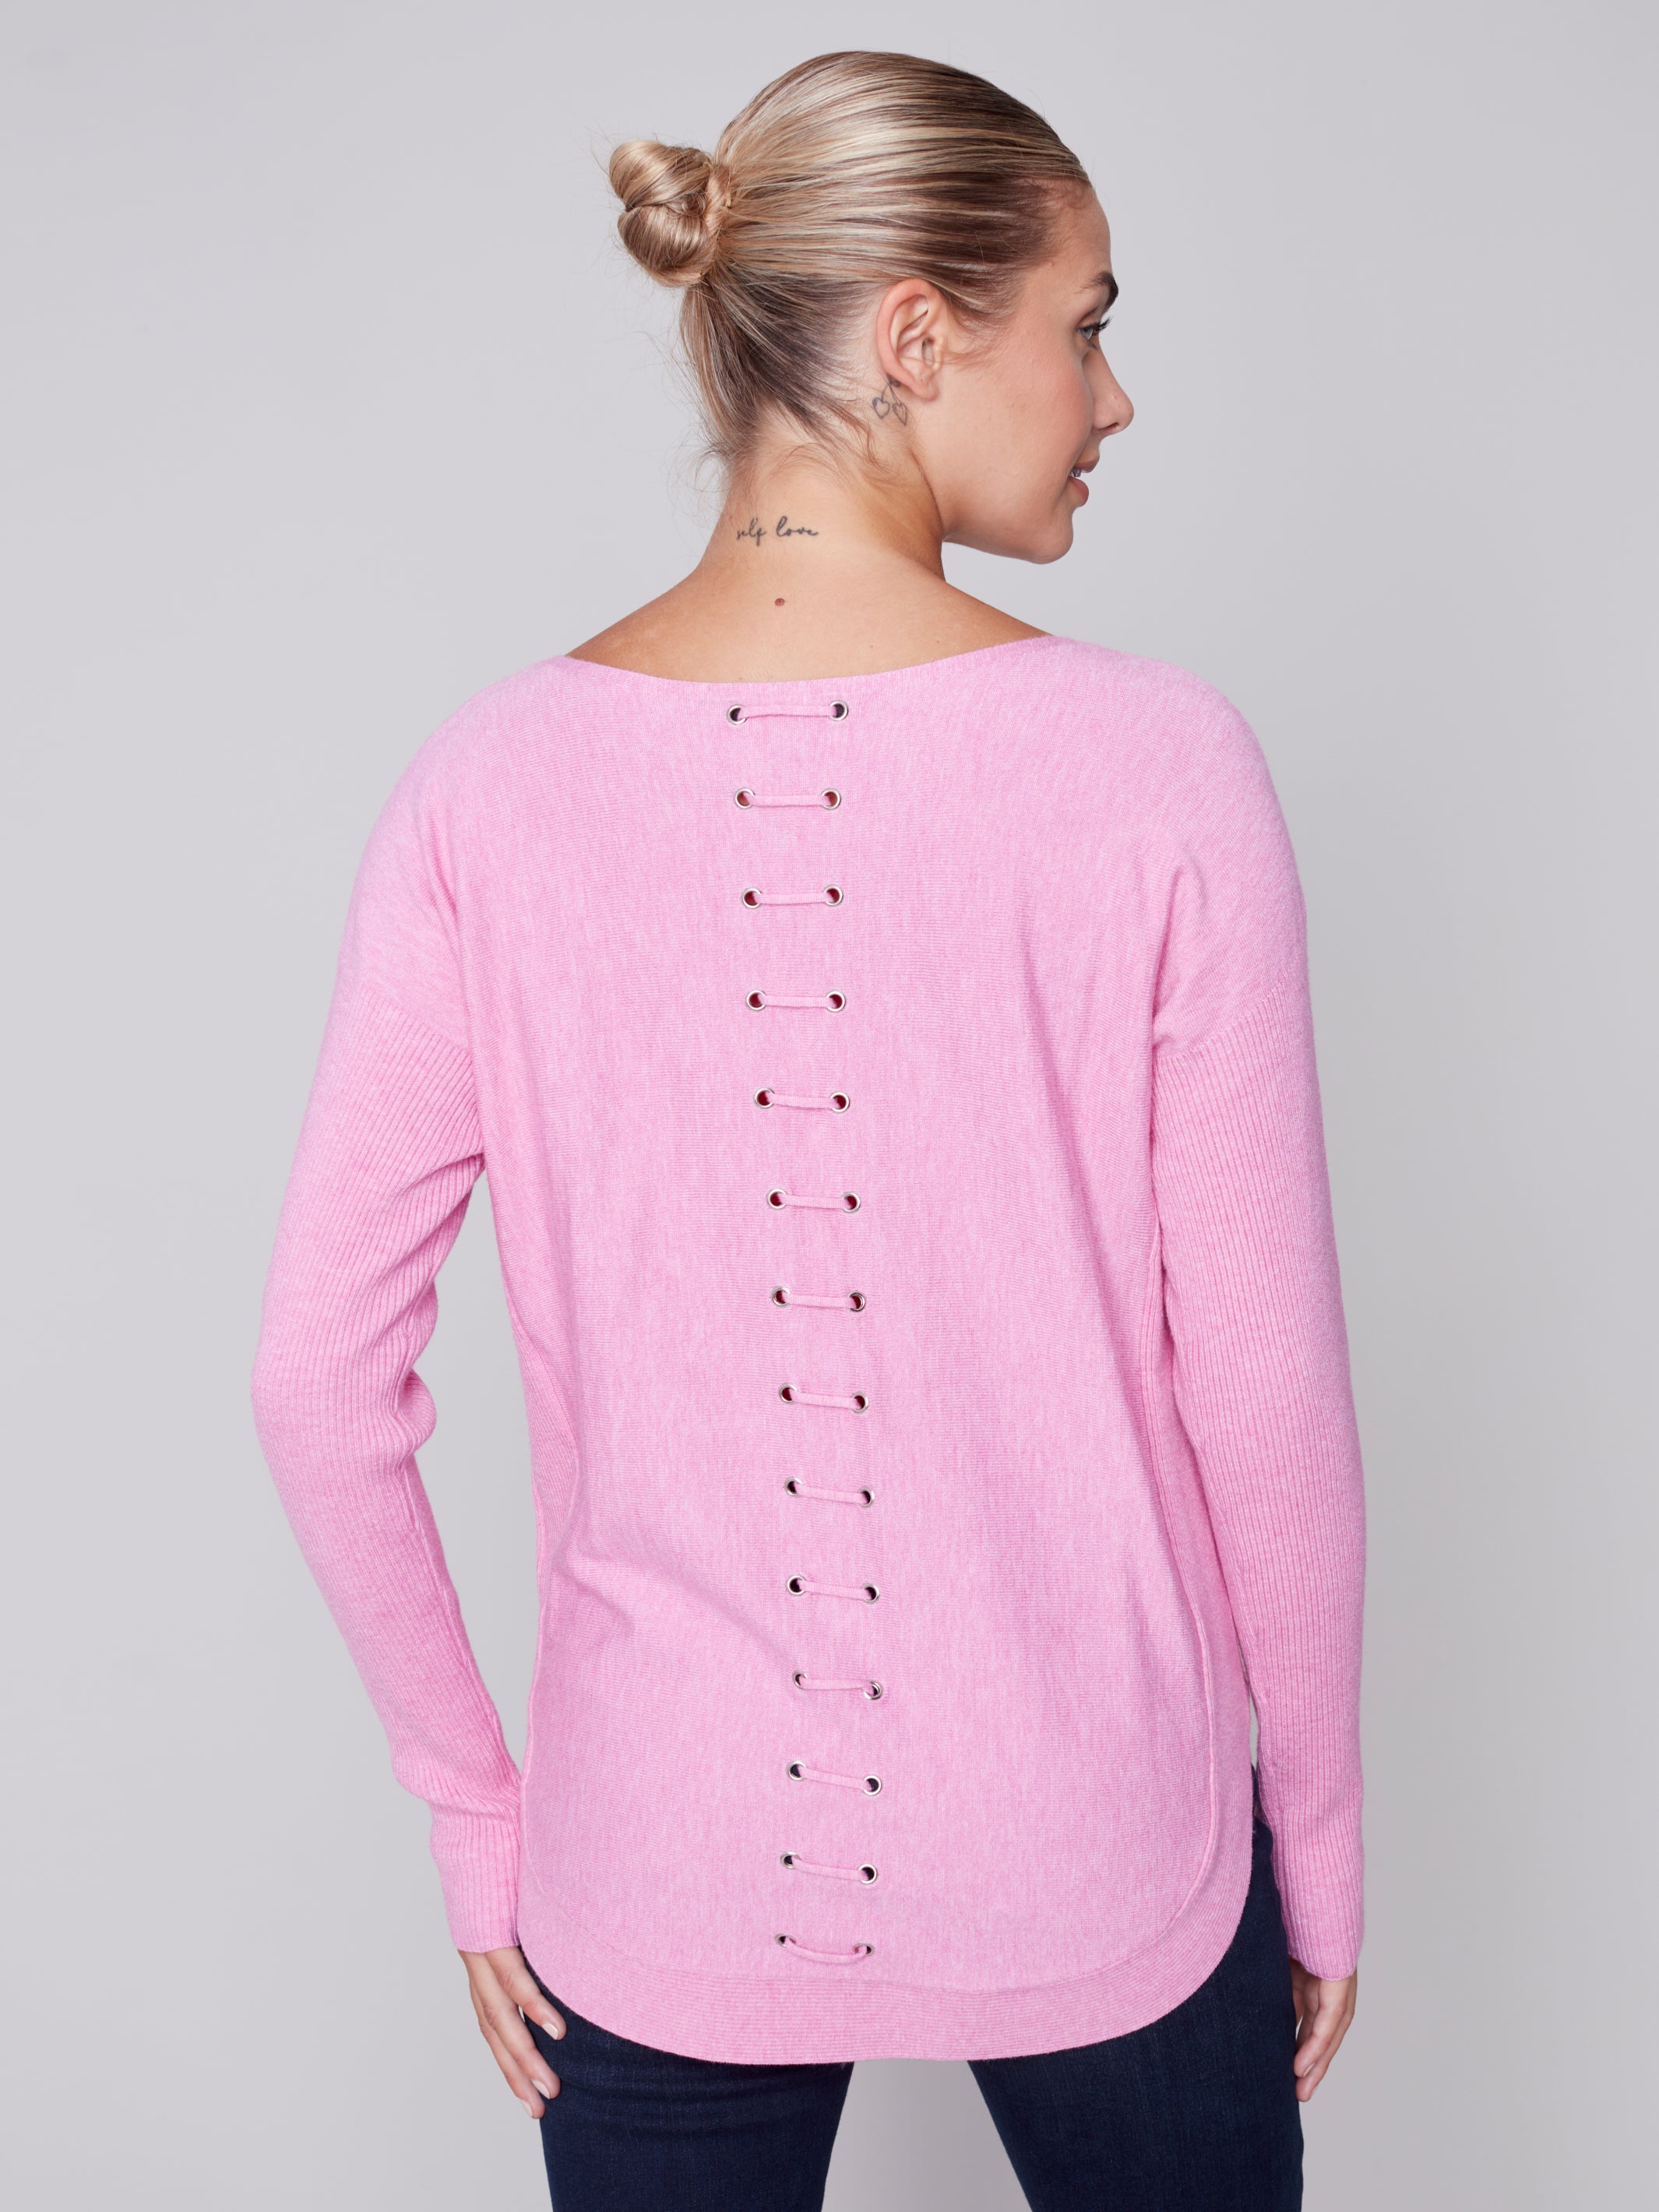 Plushy Sweater with Eyelet Details by Charlie B